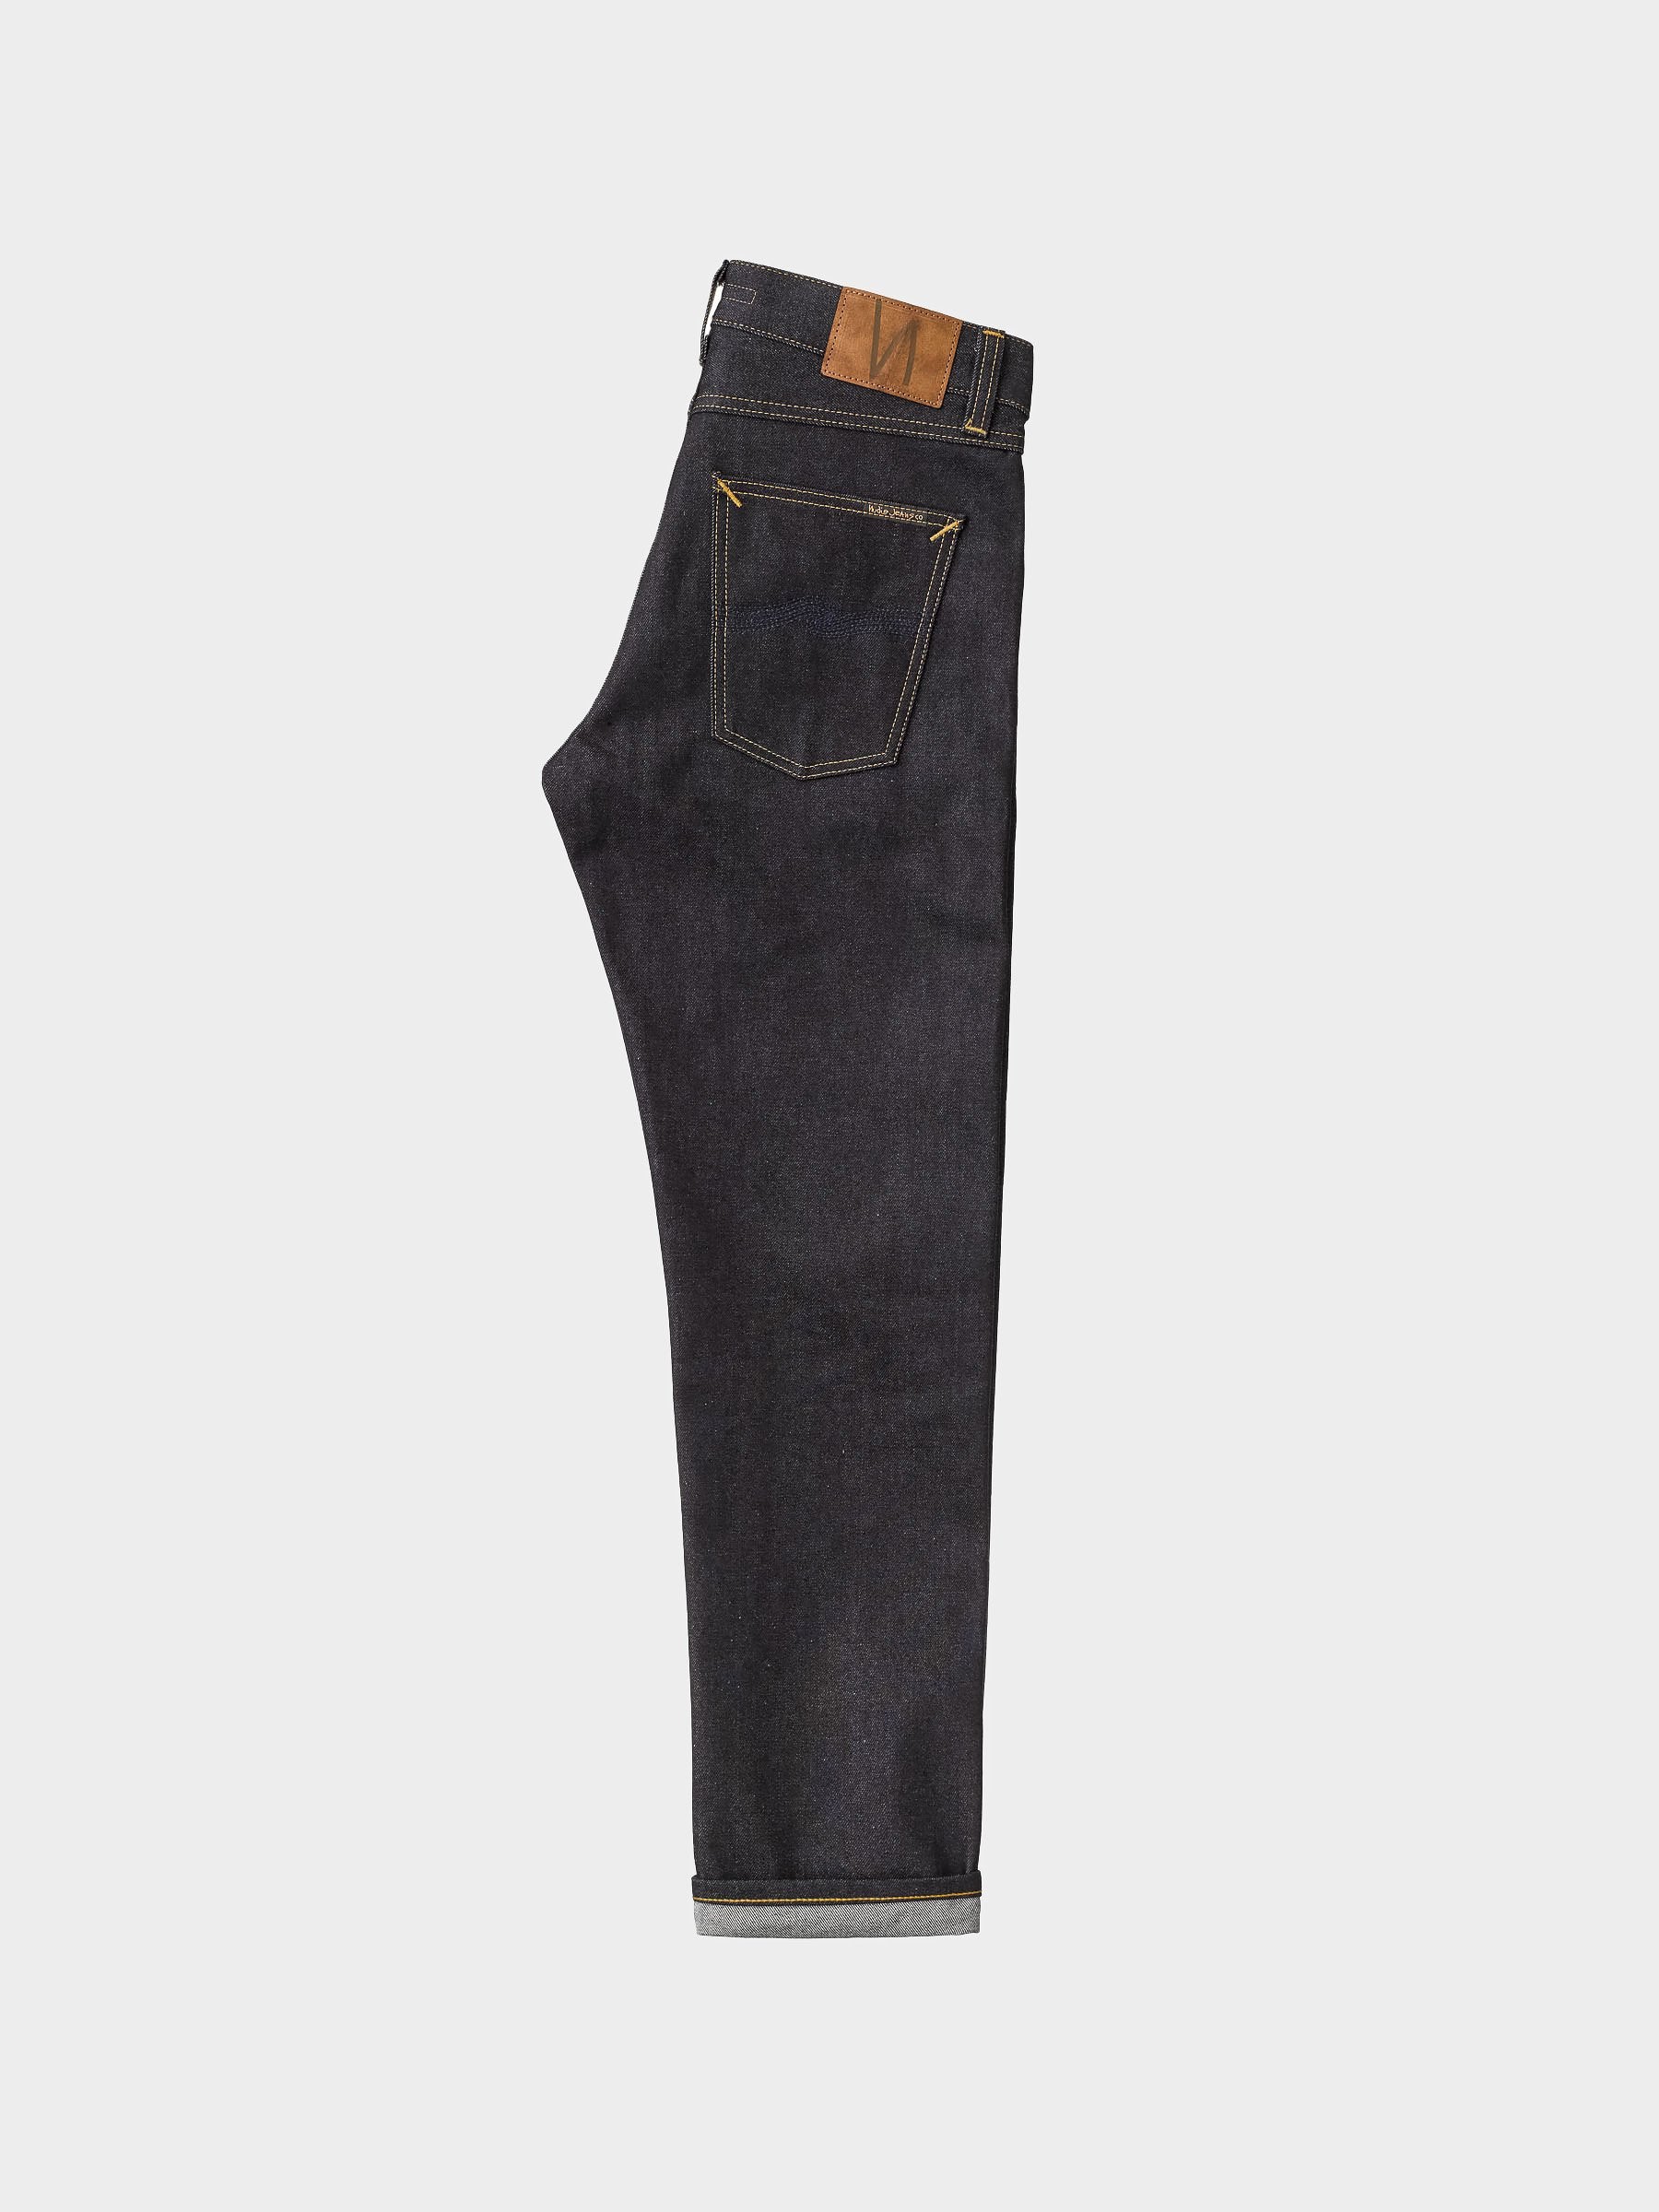 Nudie - Gritty Jackson Jean - Dry Maze Selvage